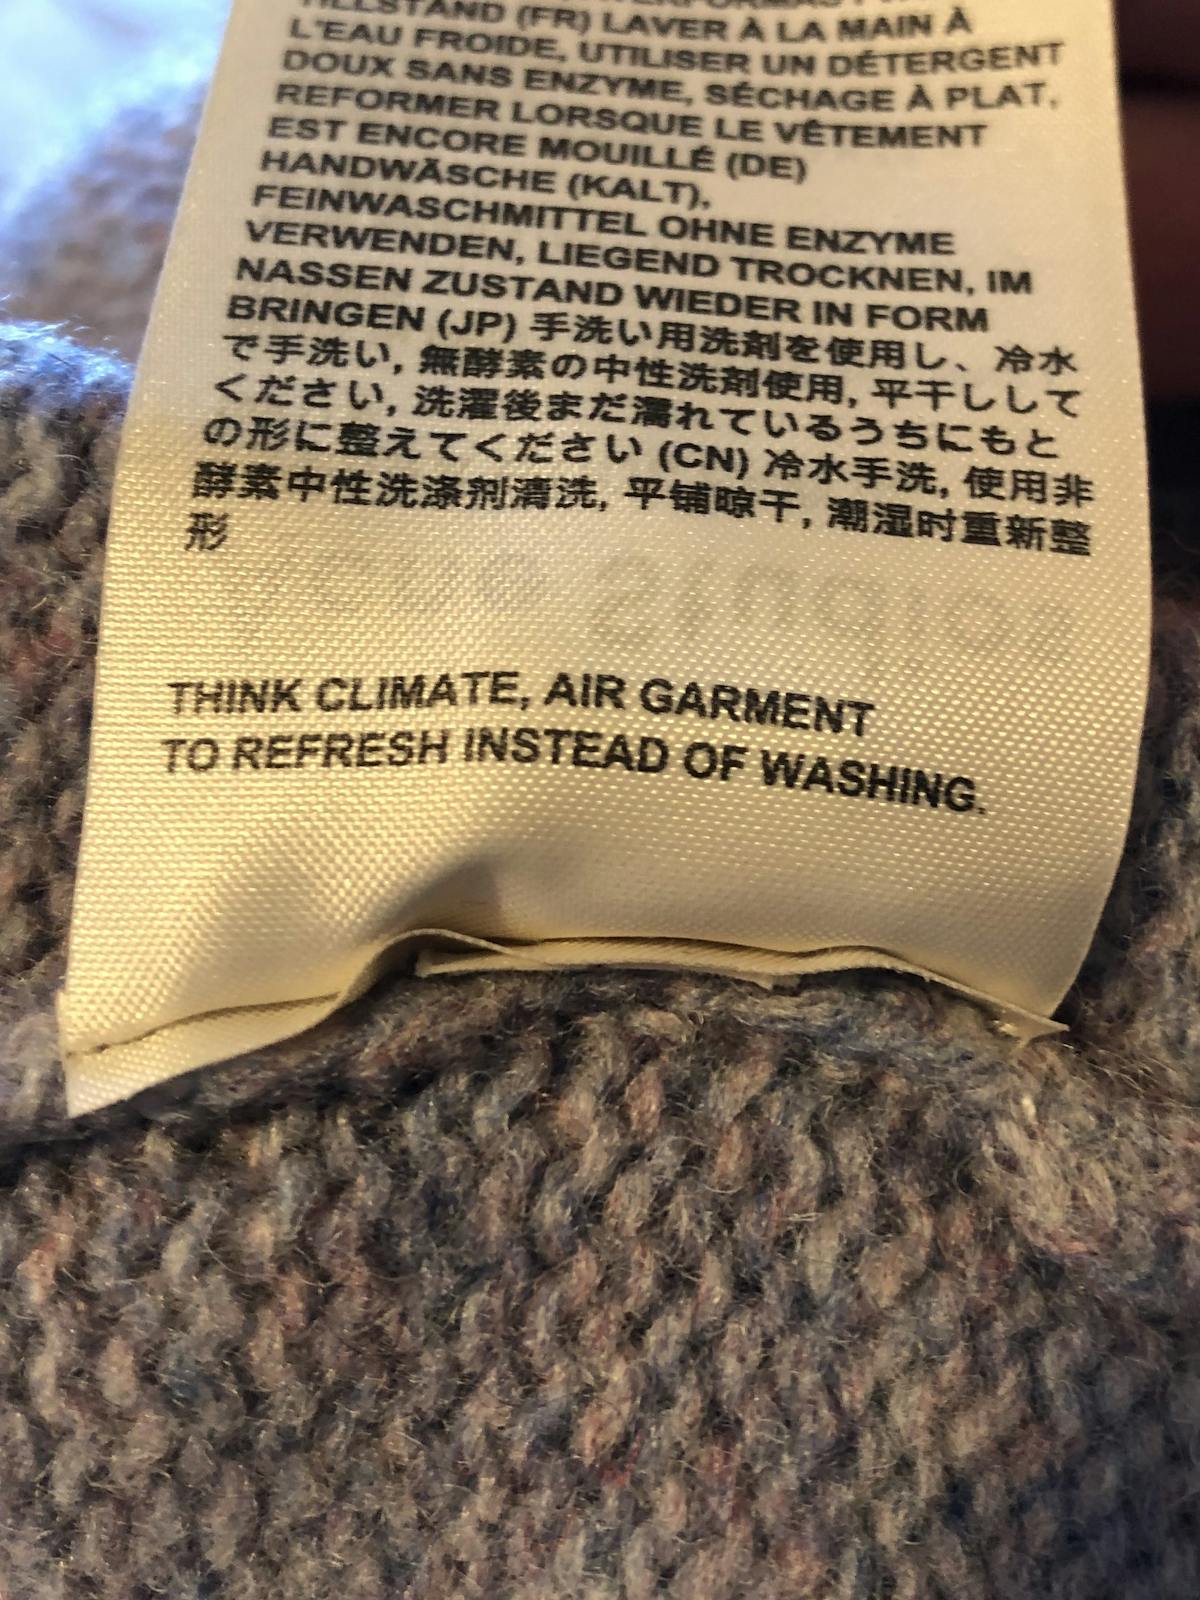  text from a care label made with custom text "Think climate. Air garment to refresh instead of washing."